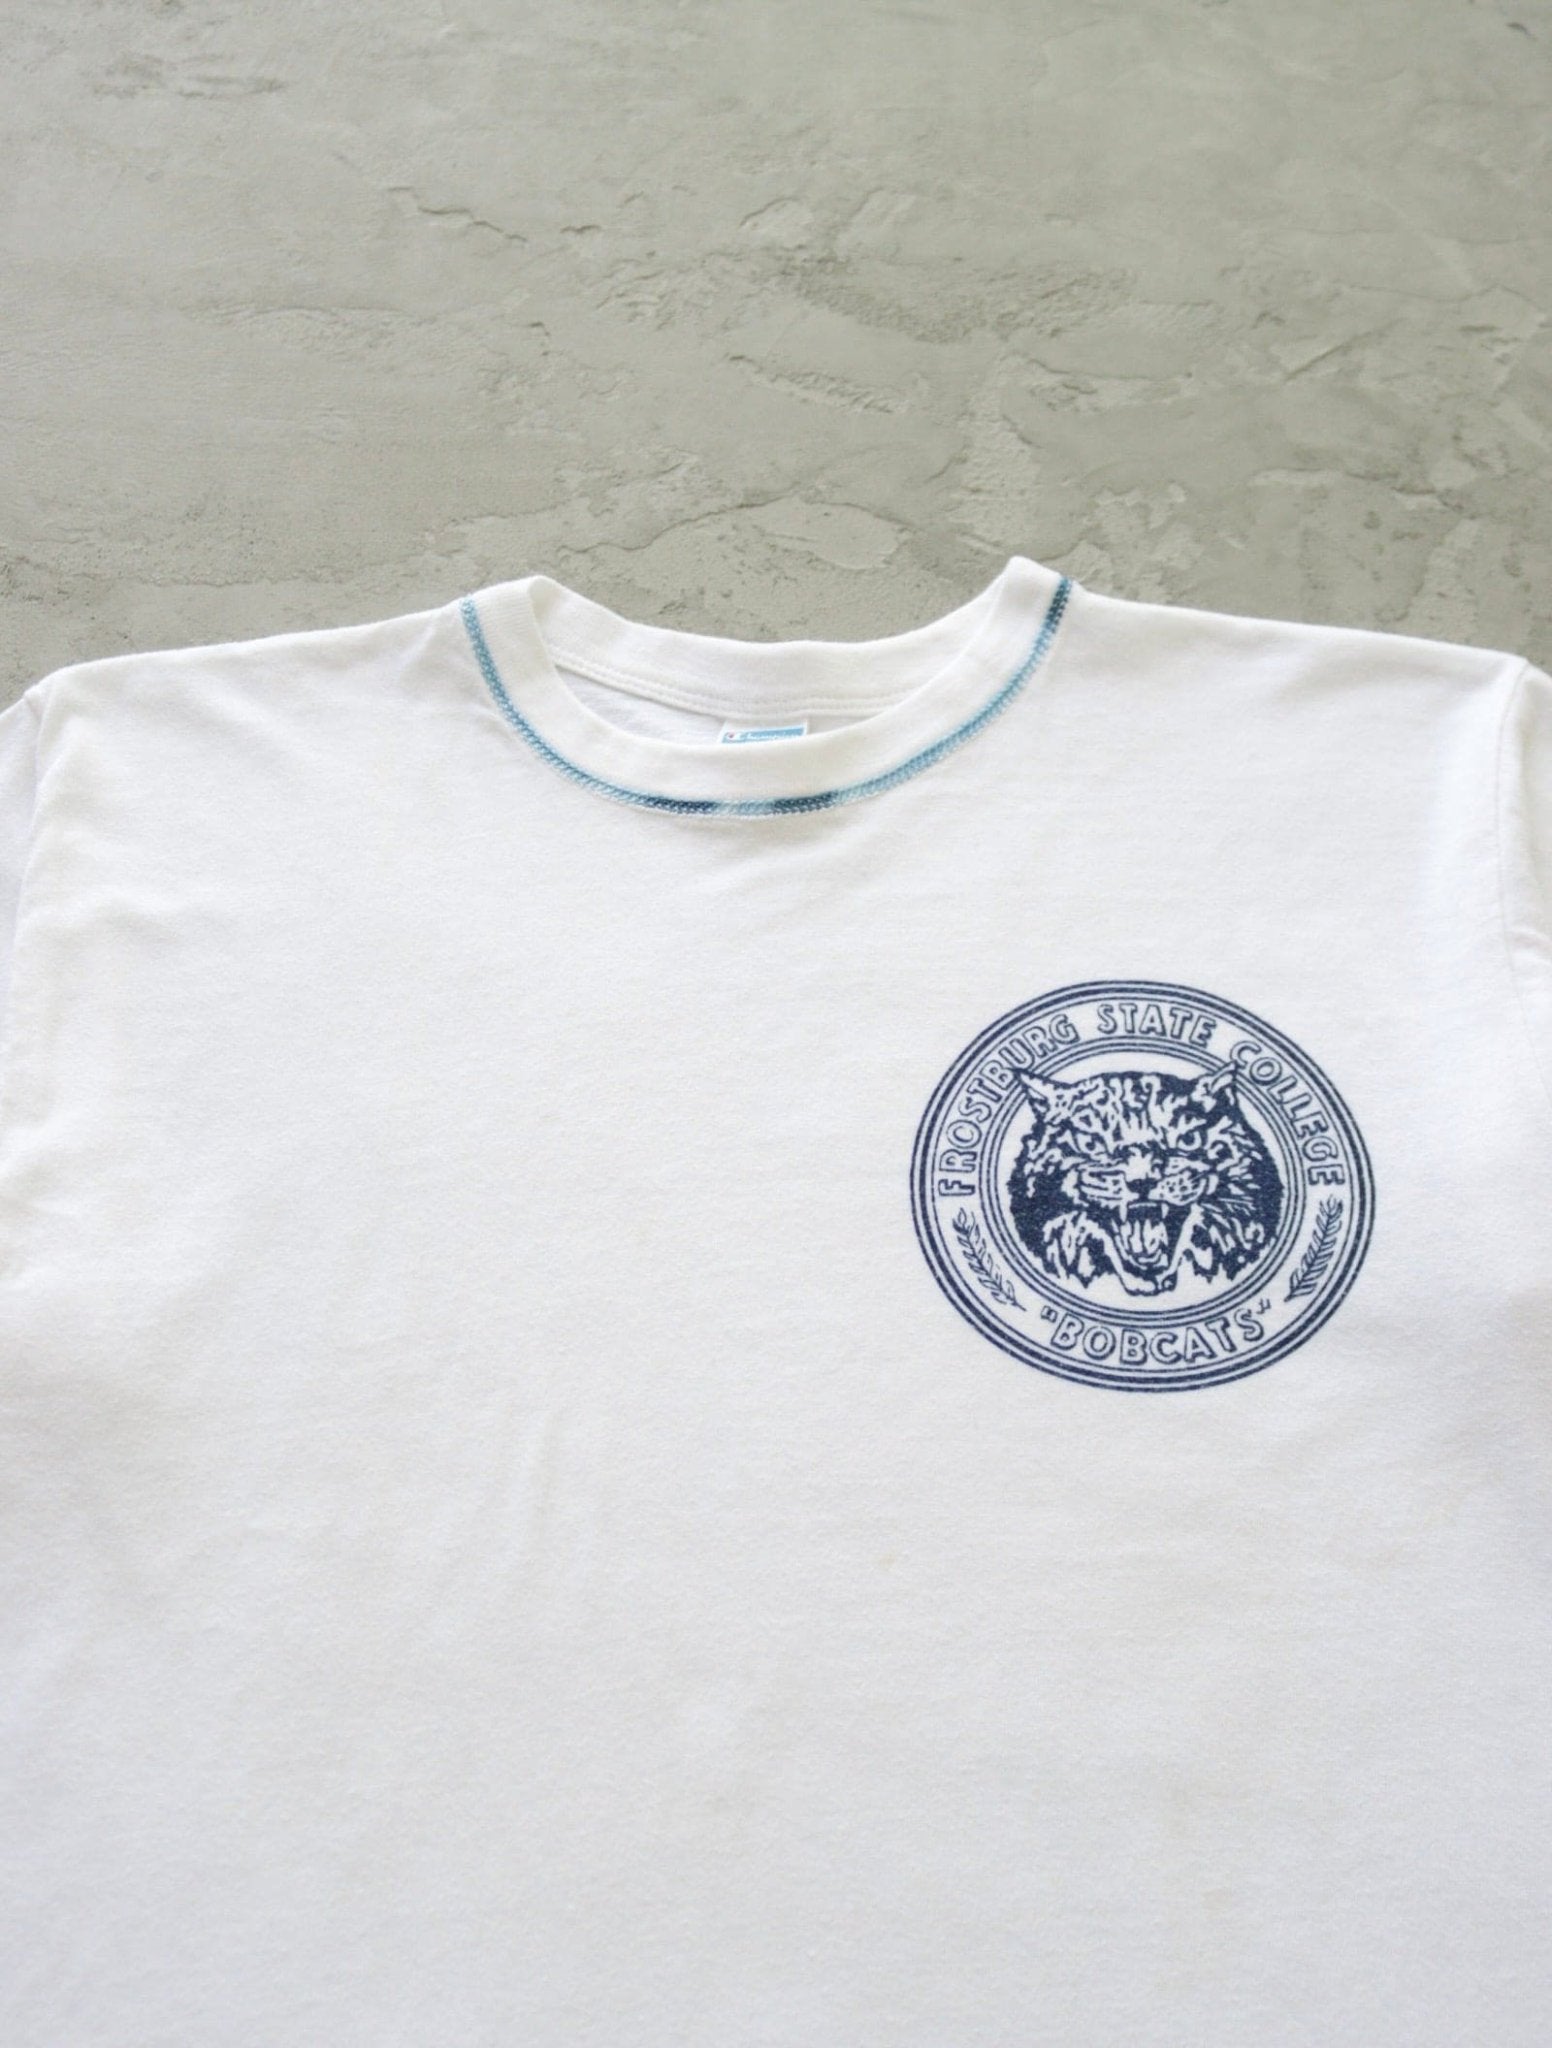 1970S BLUE BAR FROSTBURG STATE COLLEGE TEE - TWO FOLD